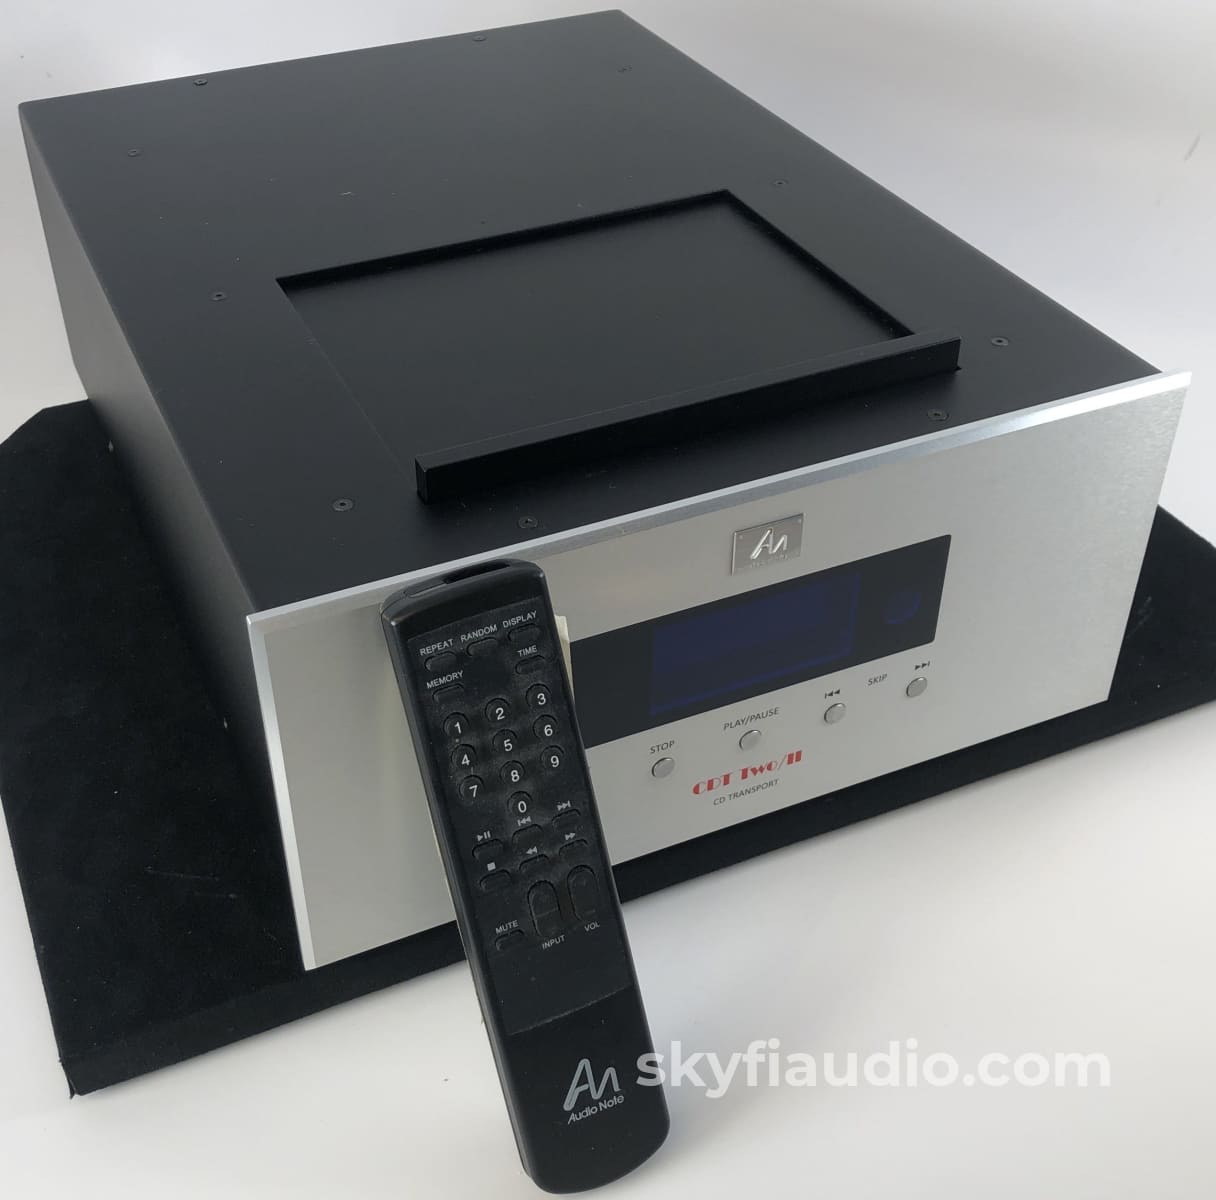 Audio Note Cdt Two/Ii Cd Transport - Top Loading! Complete With Box Remote And Manual + Digital